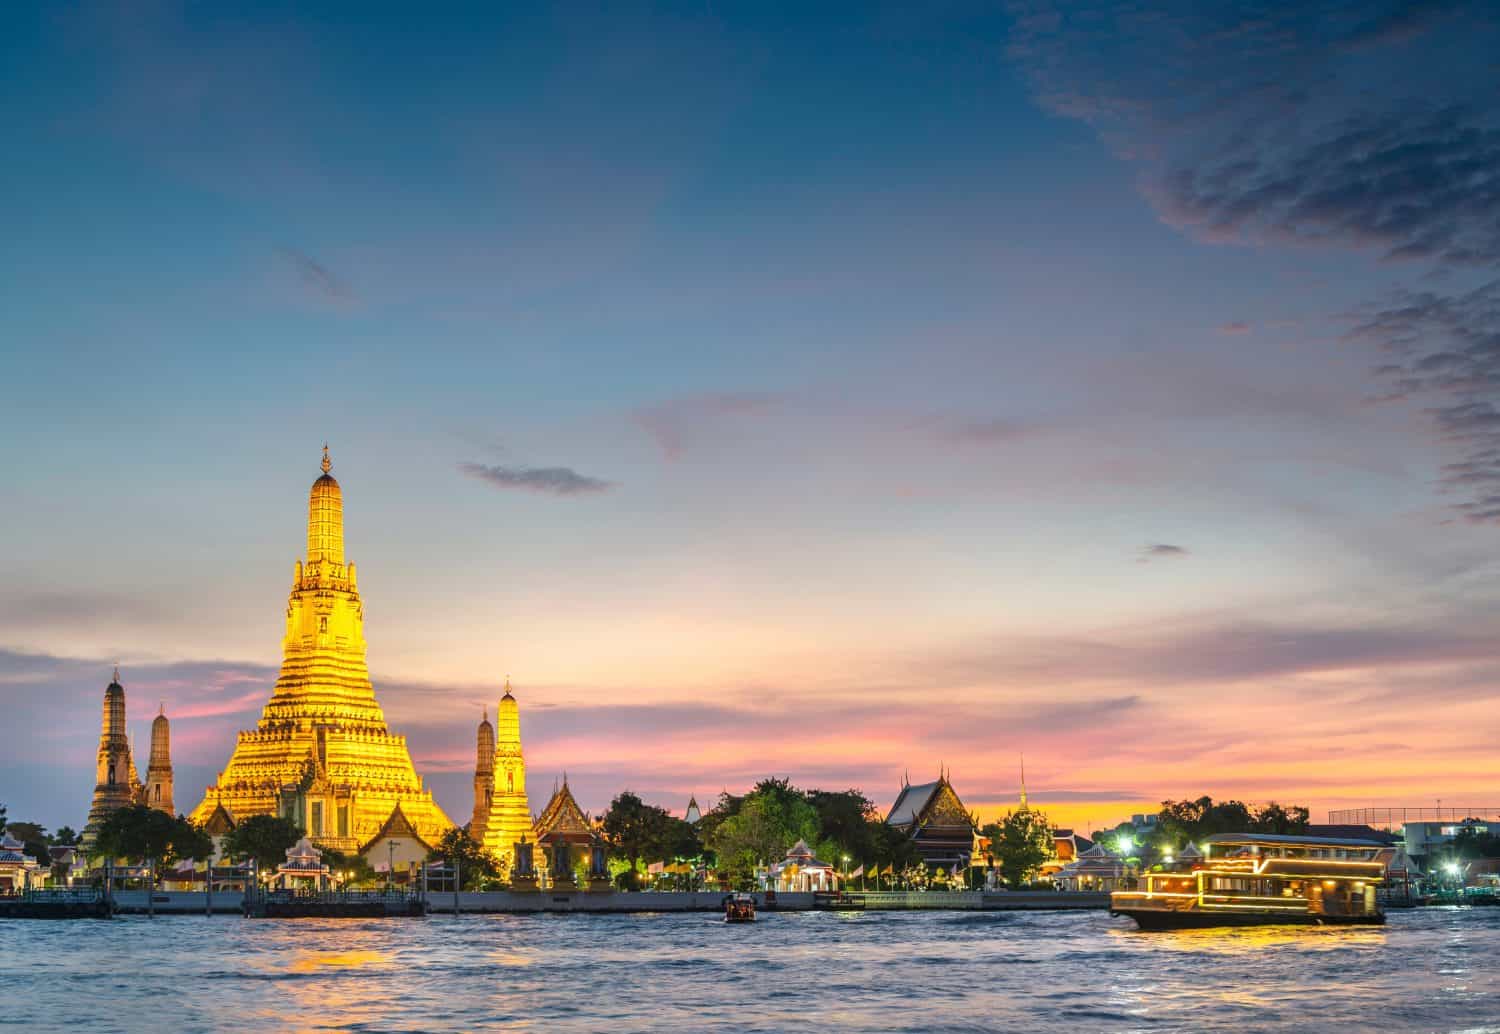 <ul> <li><strong>Location:</strong> Thailand</li> <li><strong>Known For:</strong> Culture, nightlife, and architecture</li> </ul> <p>While many know that Venice, Italy, is sinking and is predicted to submerge entirely by 2100, another city faces imminent danger of disappearing. Bangkok, Thailand, is only <a href="https://phys.org/news/2018-09-sea-bangkok-struggles-afloat.html">5 feet</a> above sea level, and many predict that the majority of the city could be underwater by 2030.</p>